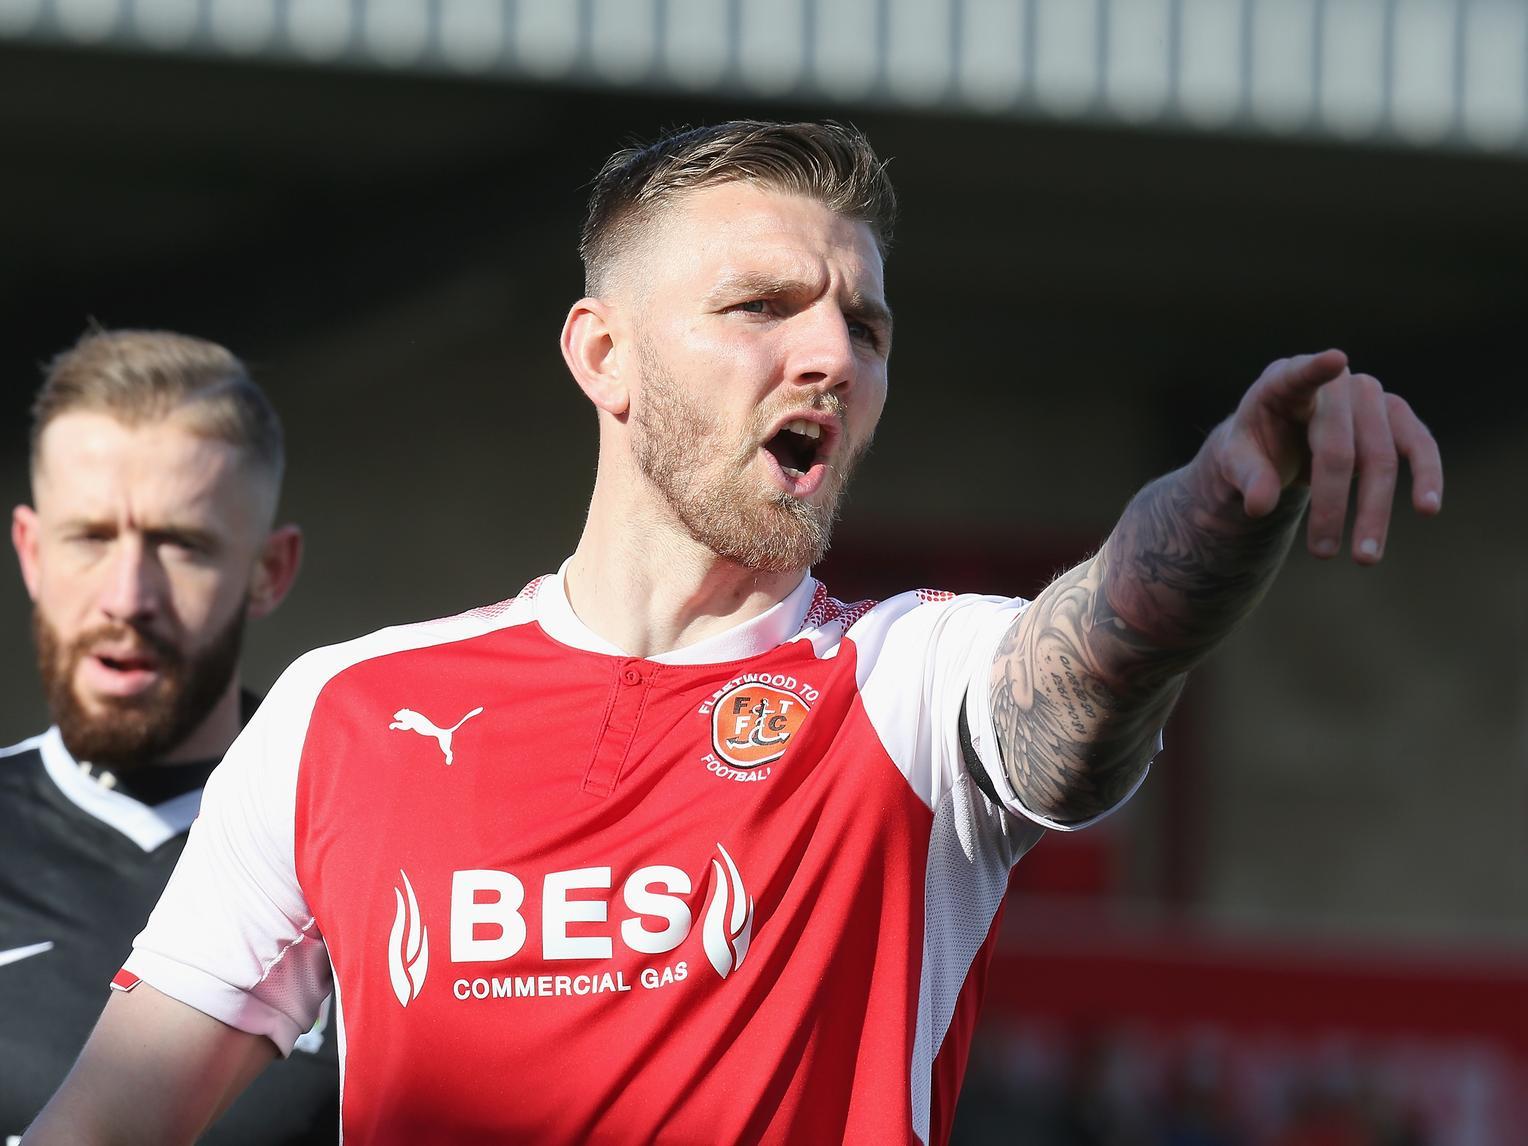 On transfer deadline day Ashley Eastham joined League Two side Salford City from Fleetwood Town.